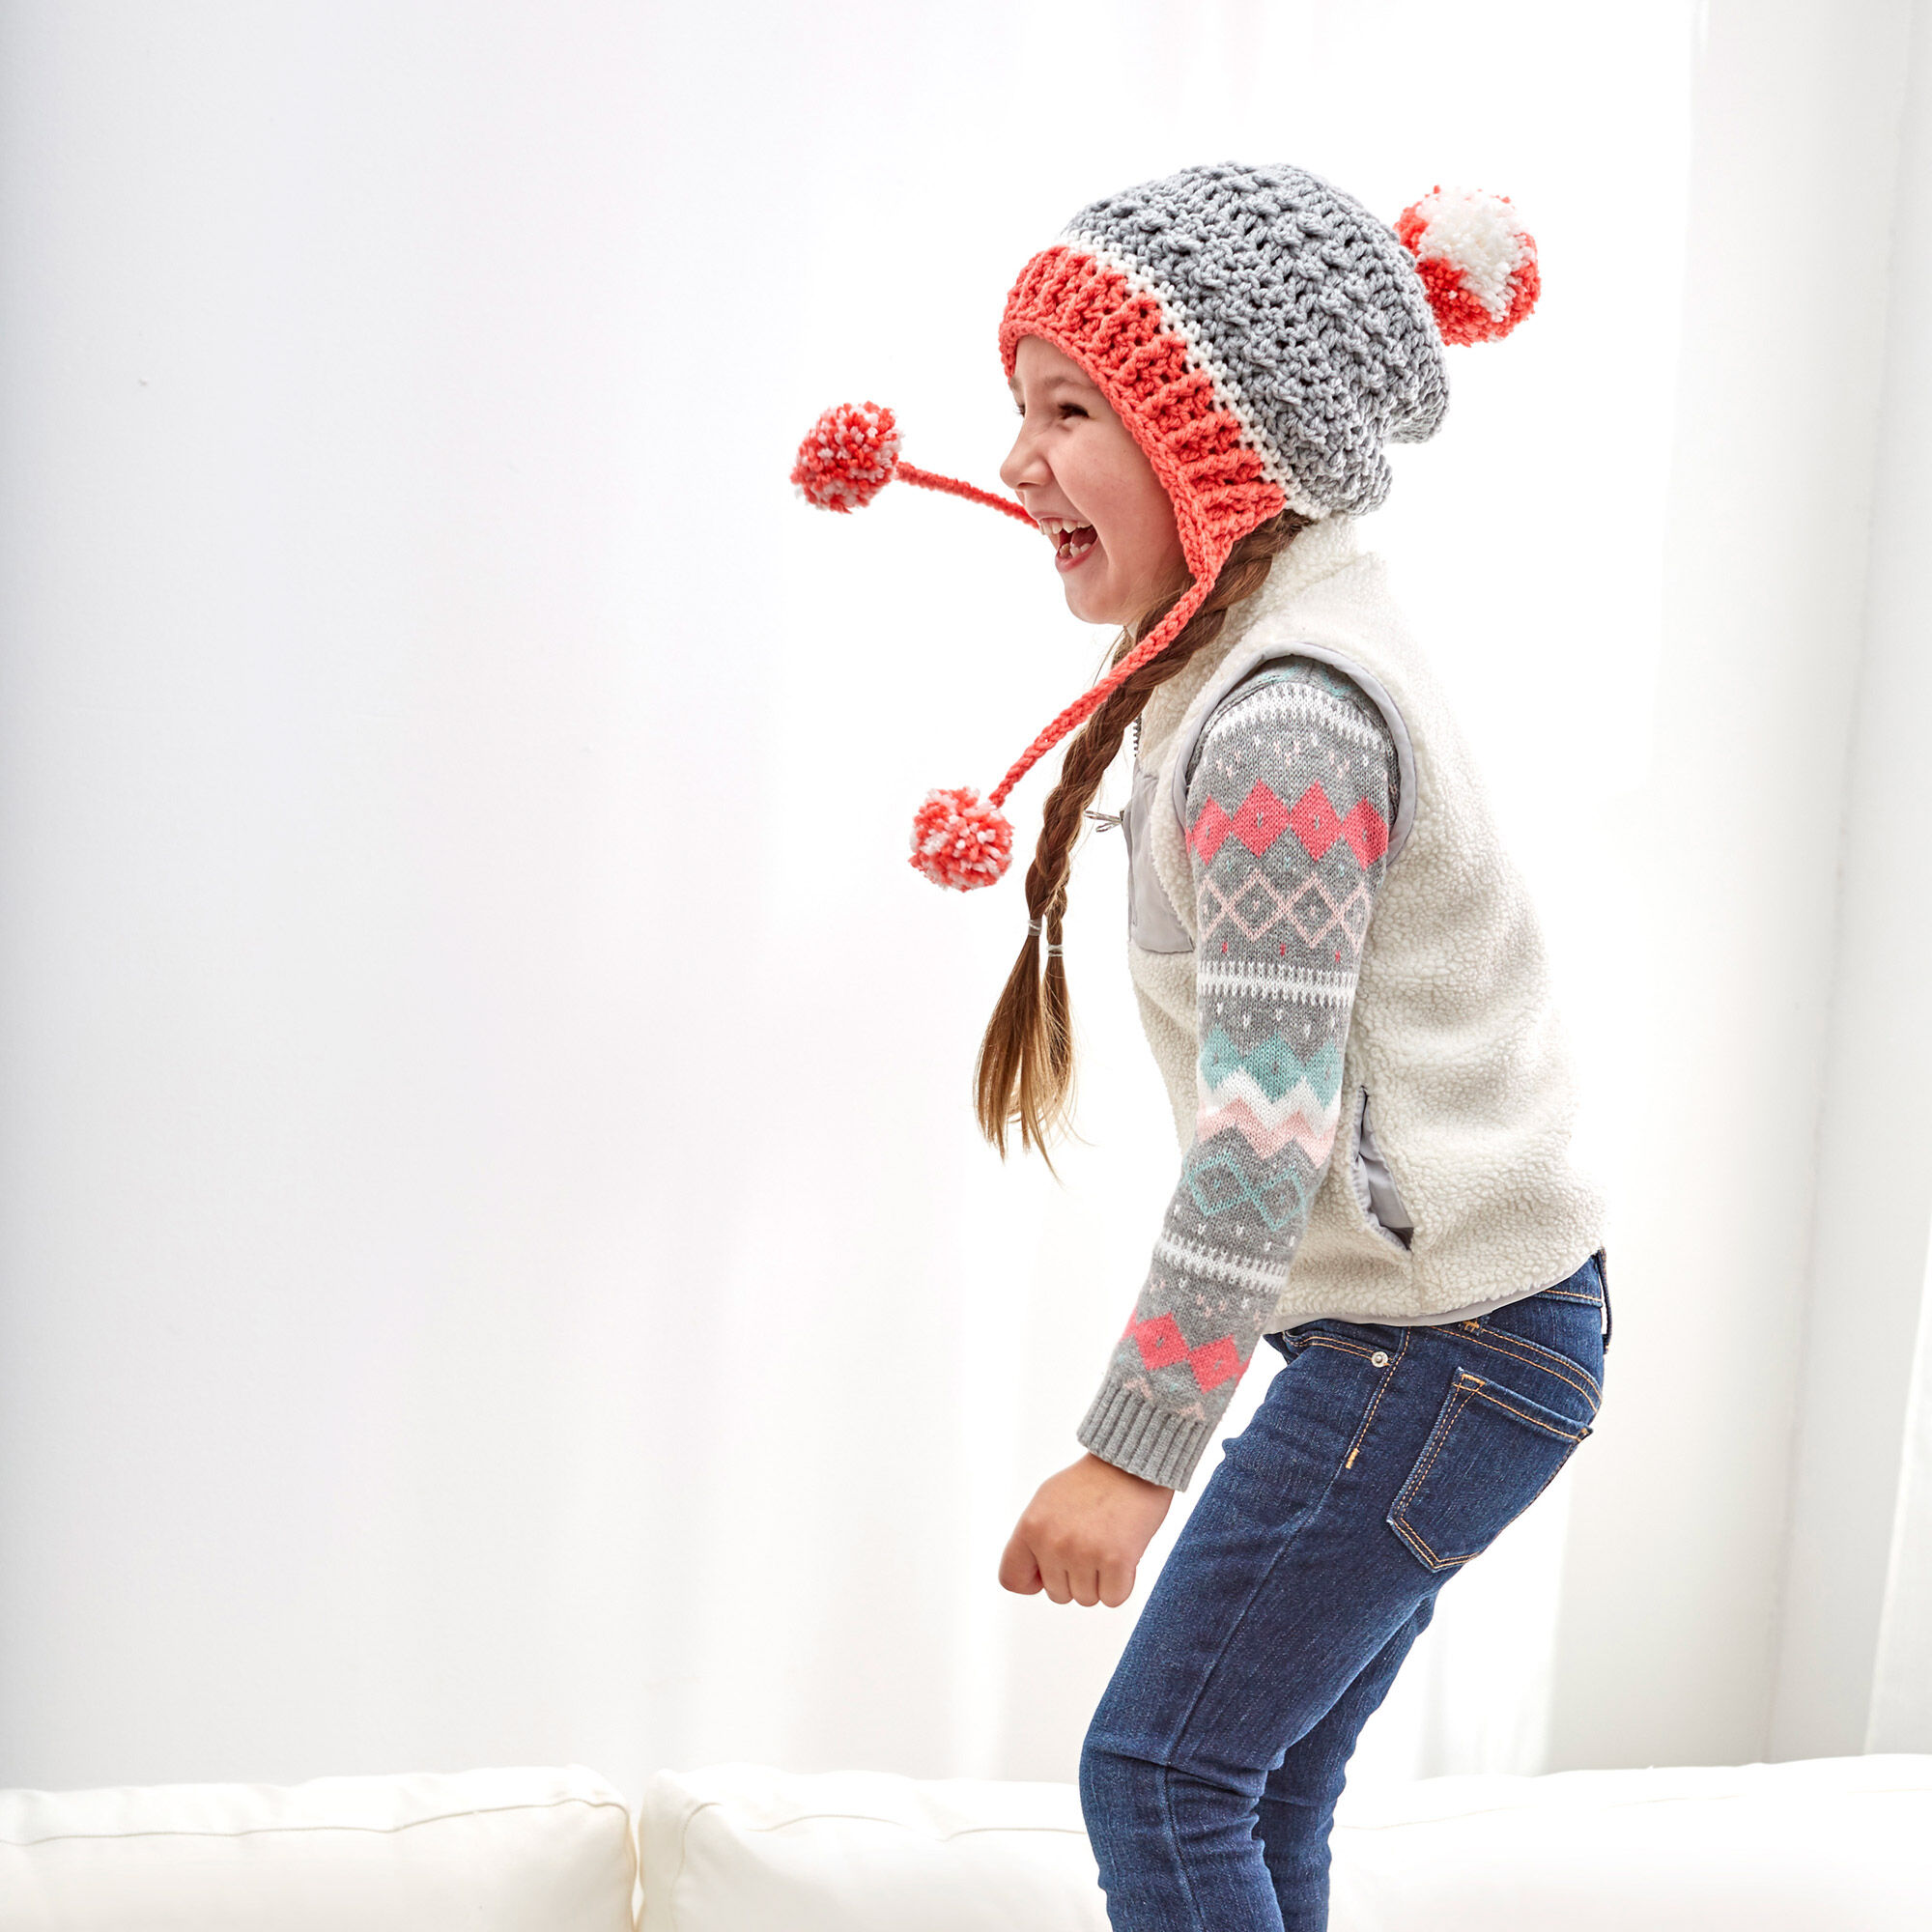 Little Miss PomPom Hat - This list of Christmas Crochet hat patterns will supply you with anything from the classics (Santa, Rudolph, Snowman) to fun animals and well-loved characters. #ChristmasCrochetHatPatterns #CrochetHatPatterns #CrochetPatterns